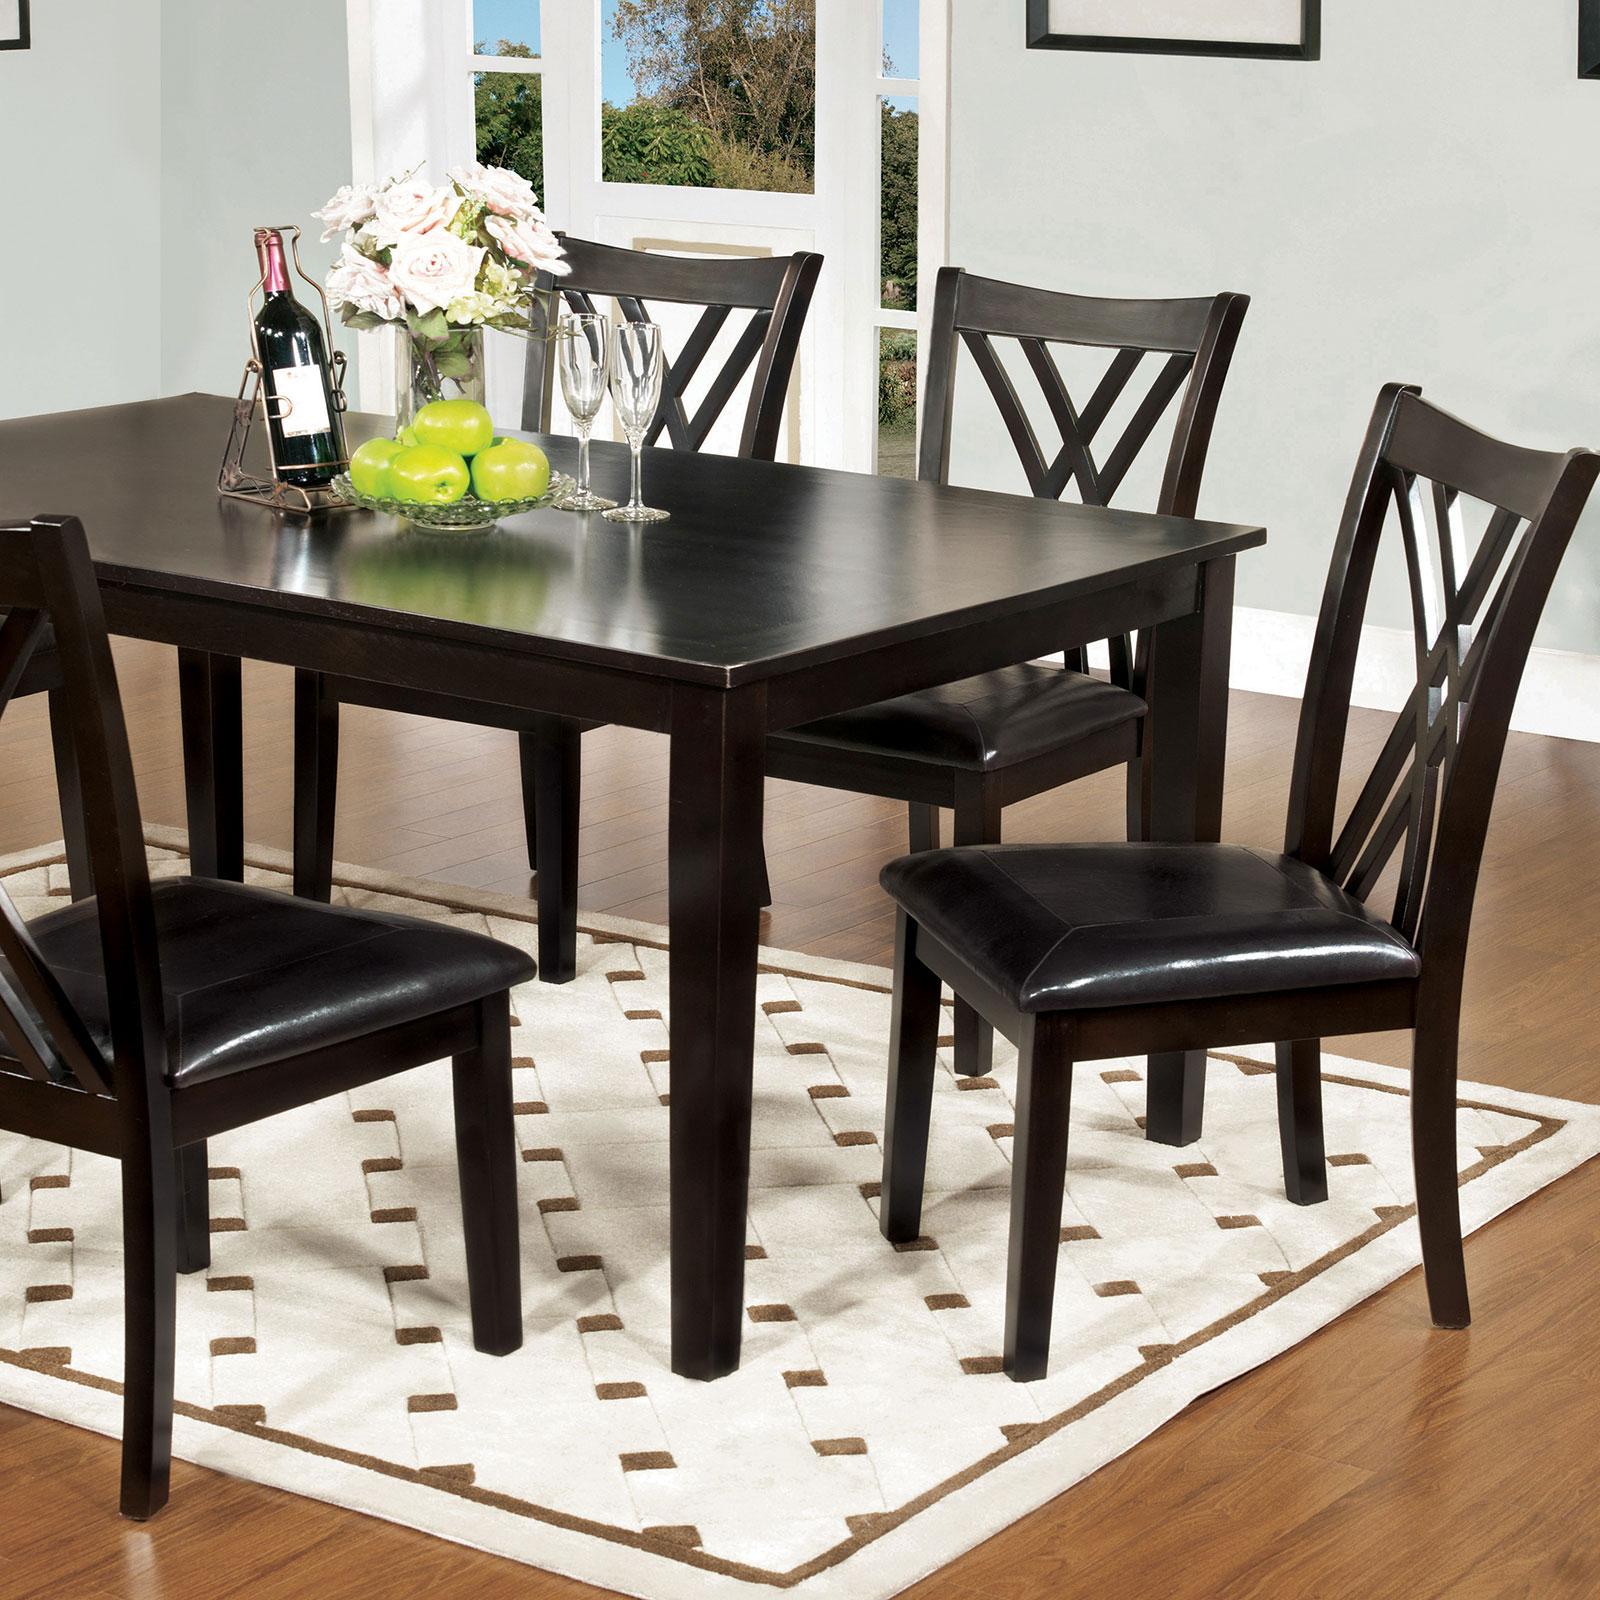 Transitional Dining Table Set SPRINGHILL CM3460T-7PK CM3460T-7PK in Espresso Leatherette